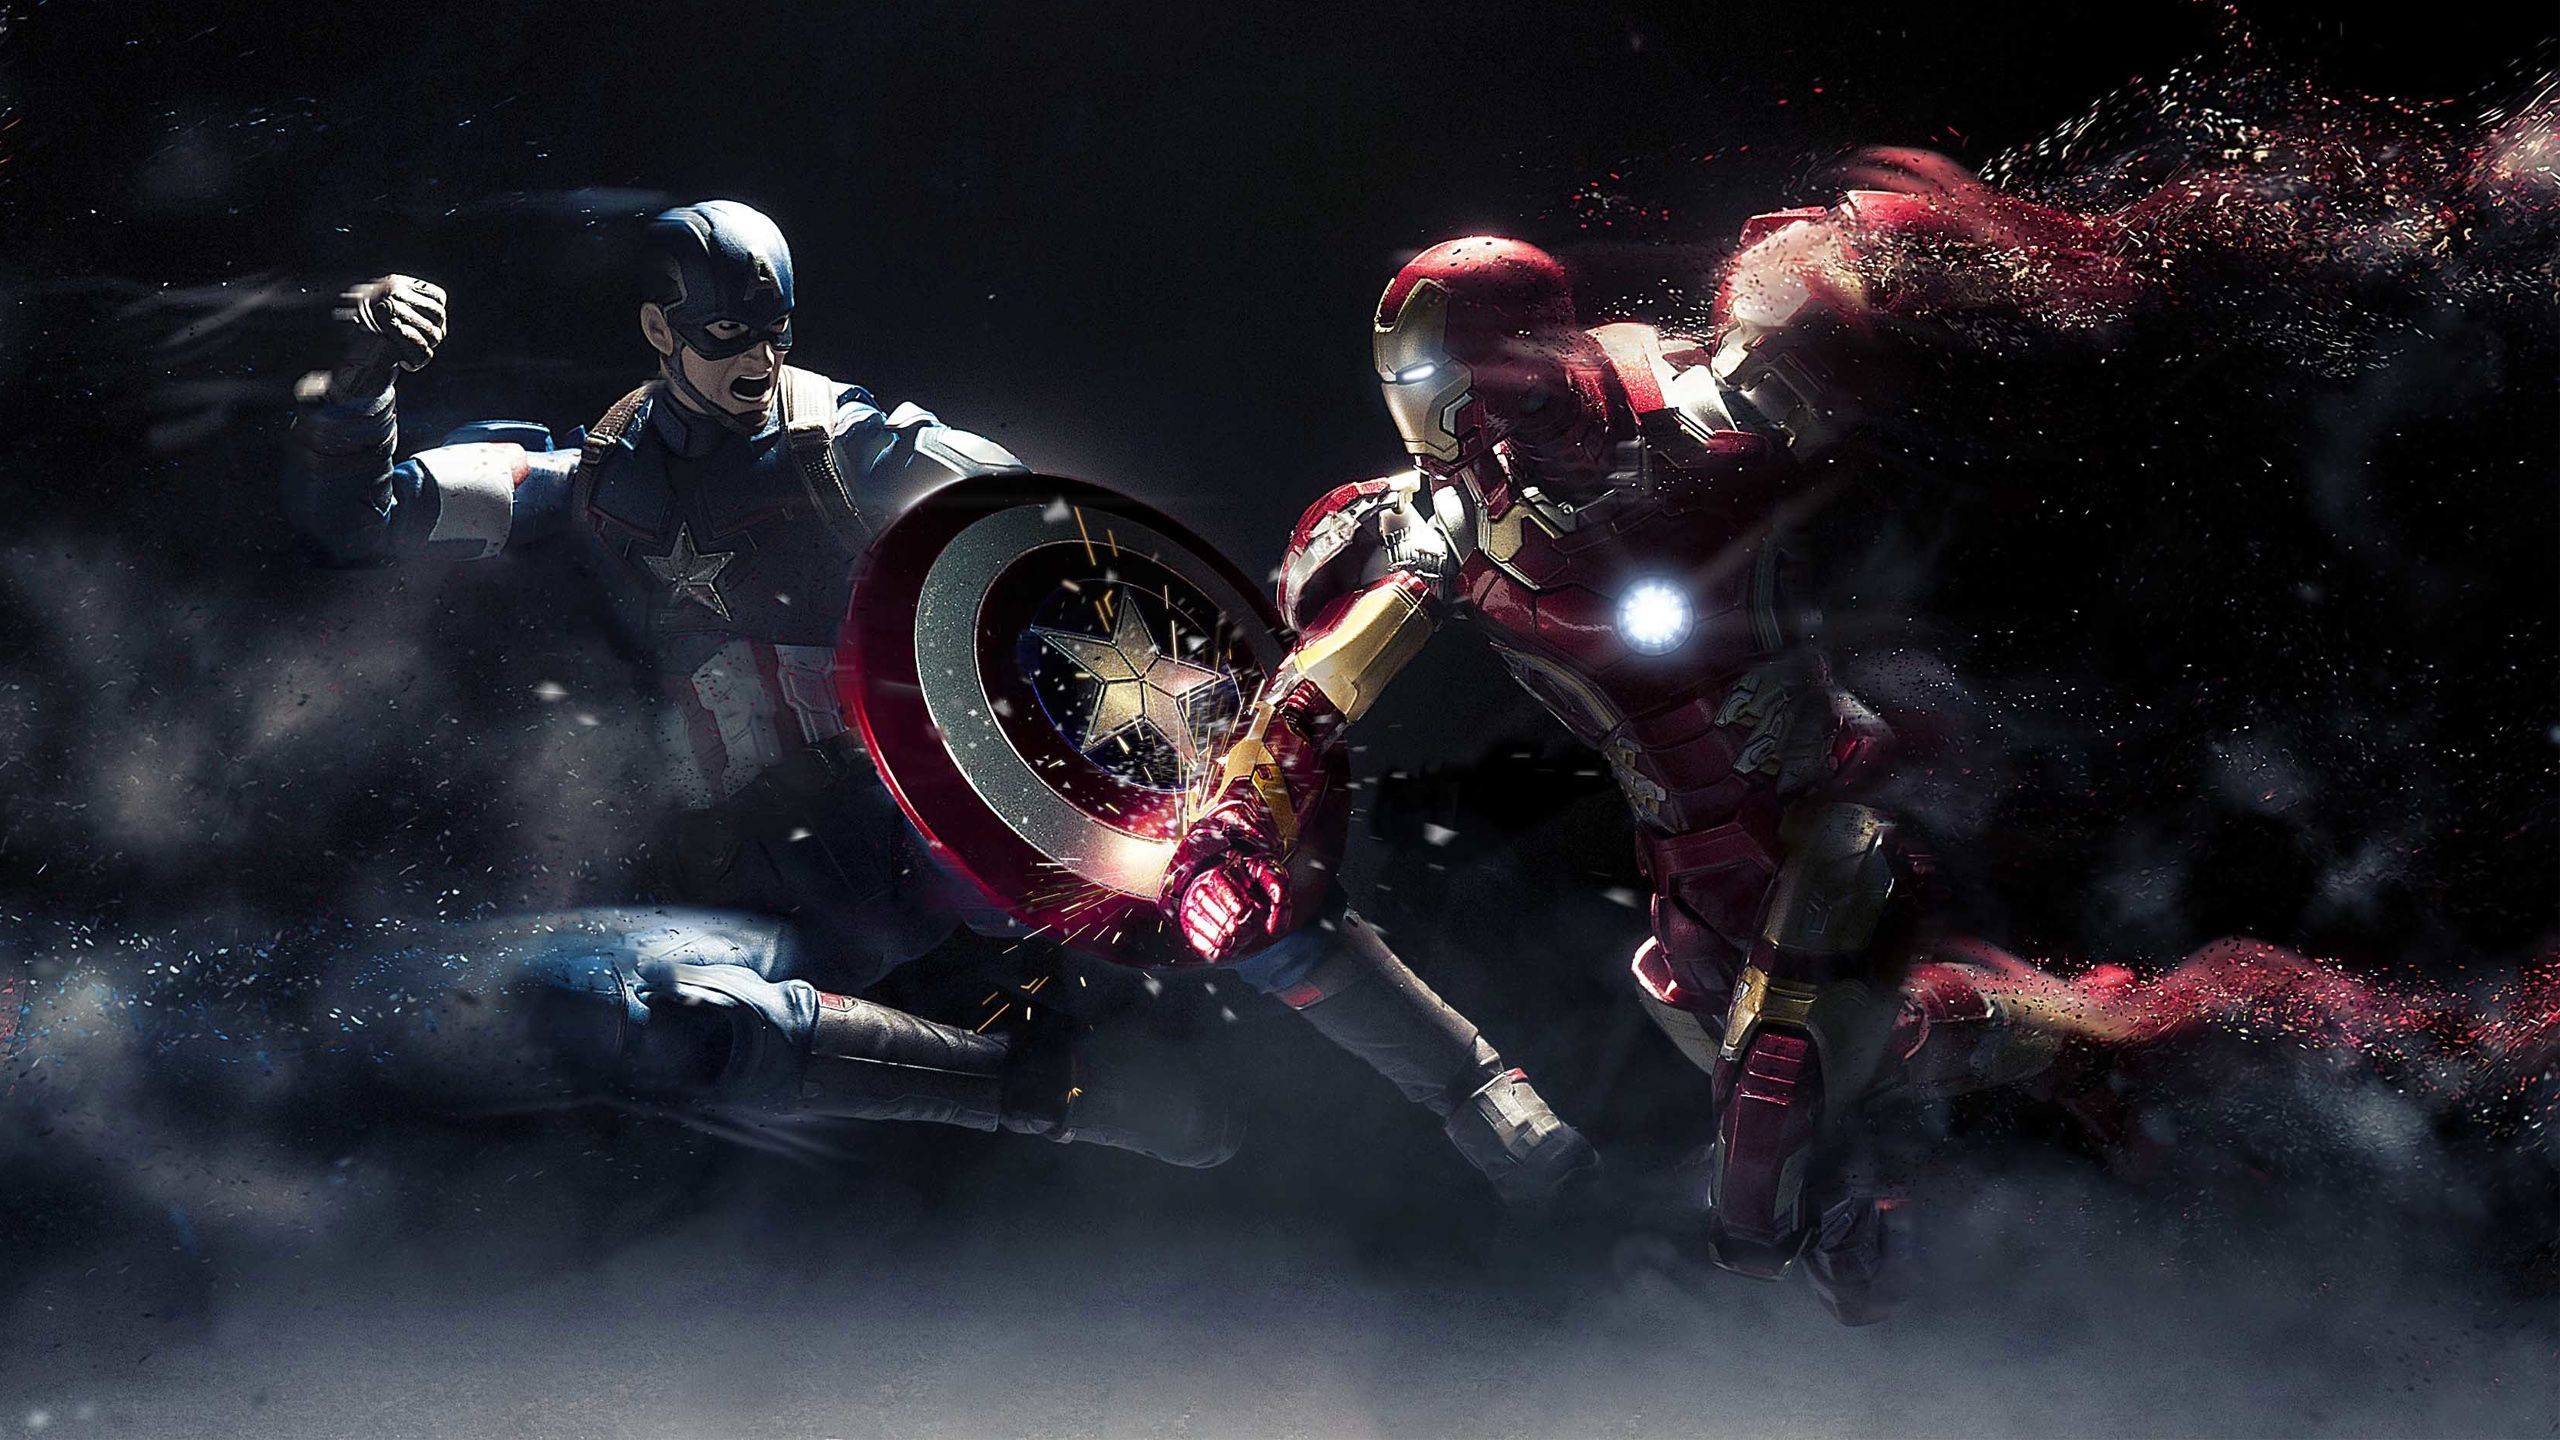 Captain America Vs Iron Man Wallpapers HD Backgrounds